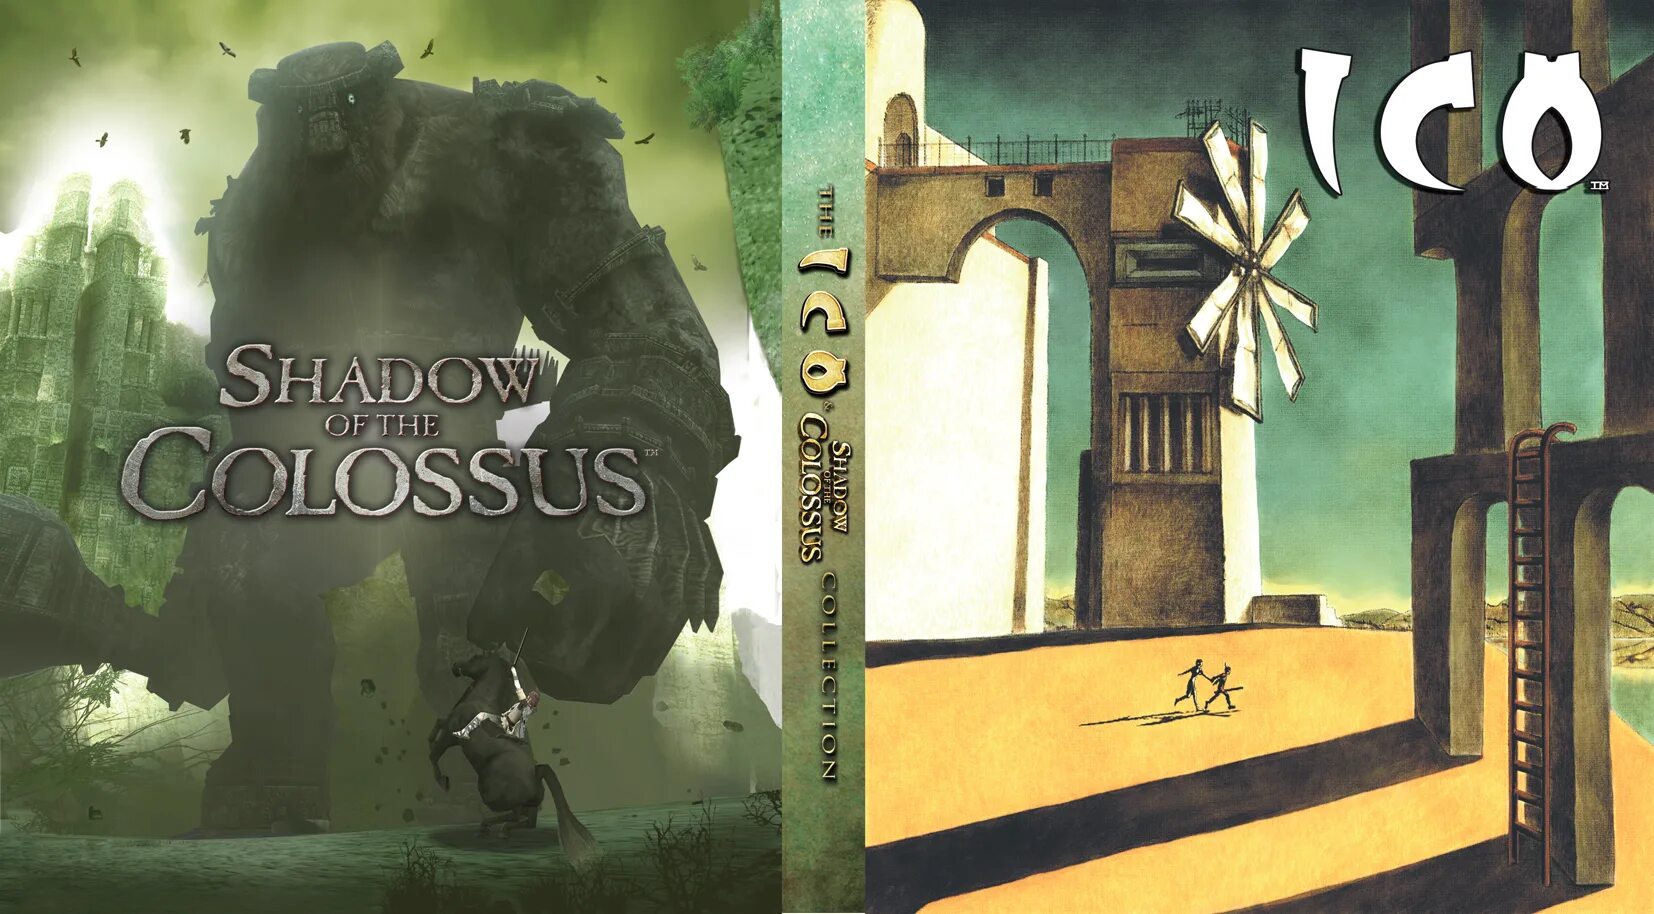 Shadow of the Colossus ps4. Игра на ps3 Shadow of the Colossus. Shadow of the Colossus Sony ps4. Обложка Shadow of the Colossus ICO ps3. Обложка shadow